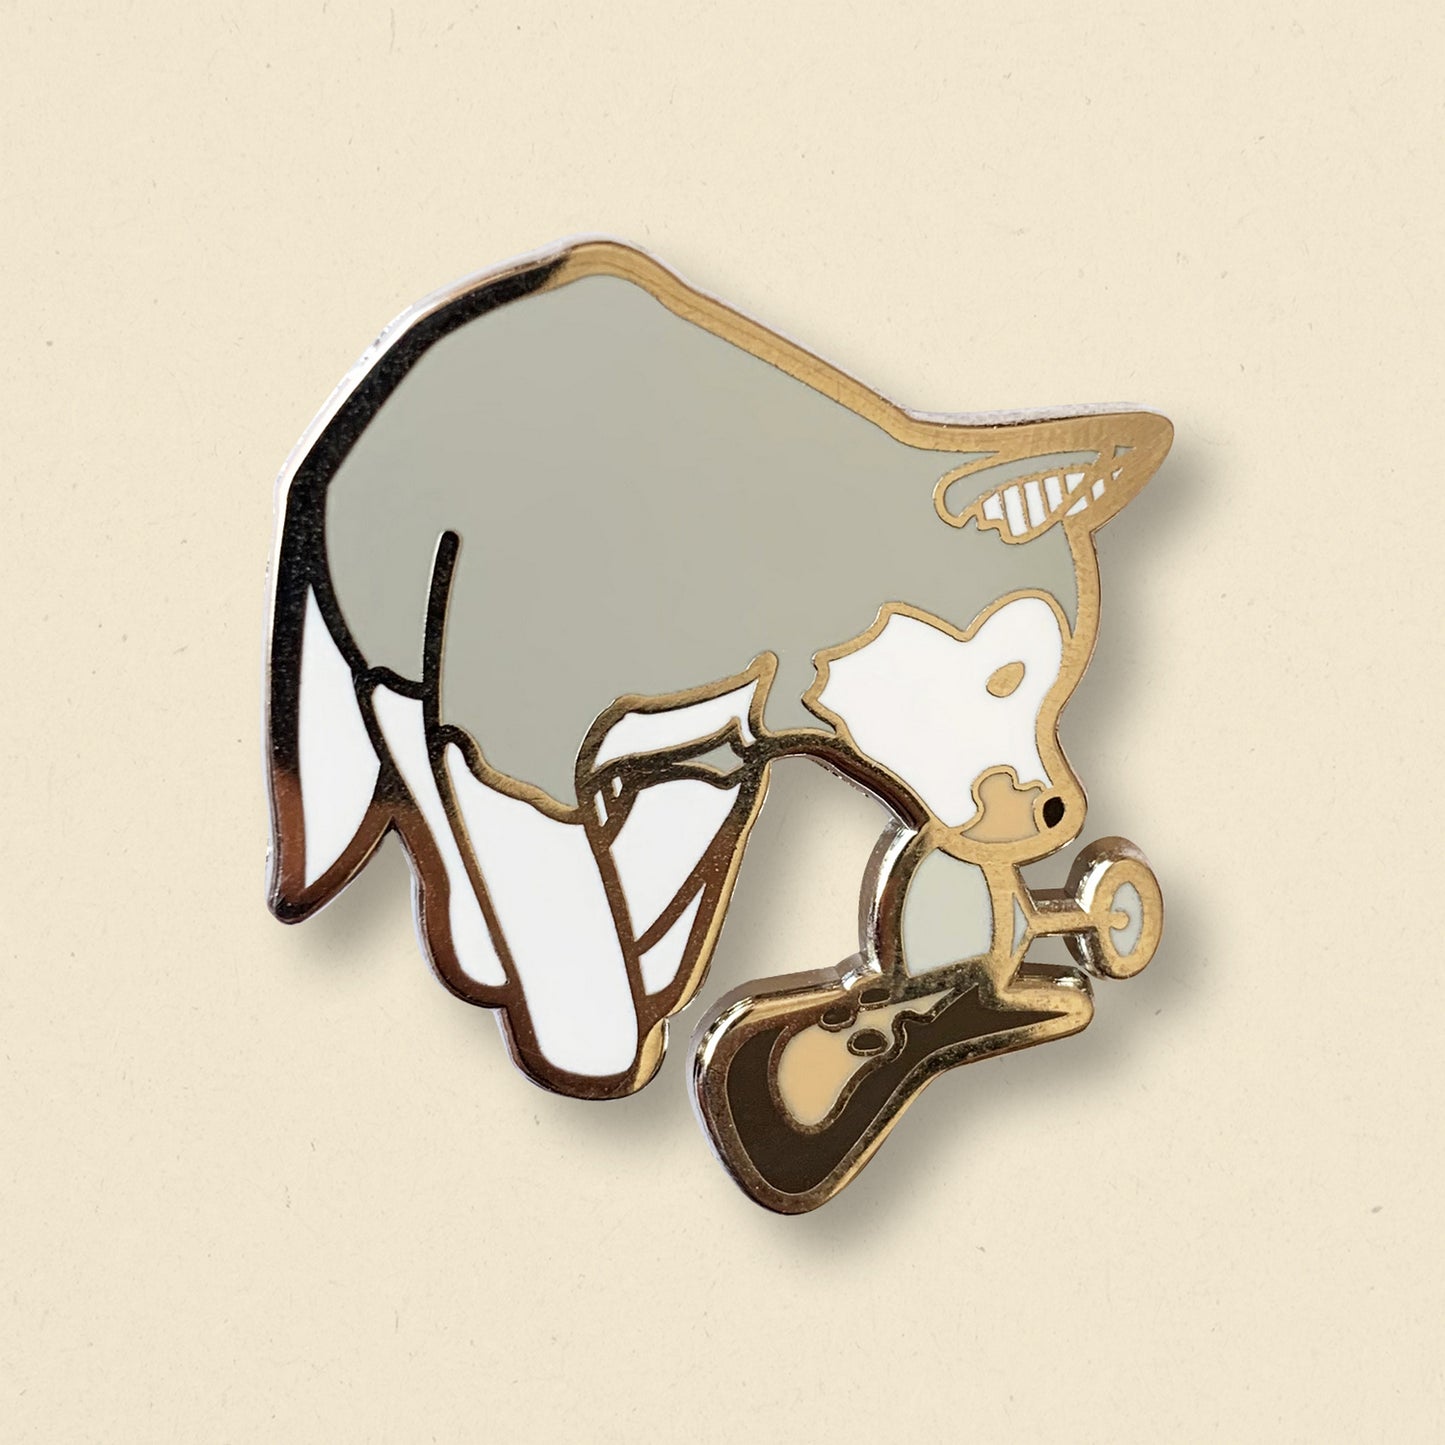 Husky and Espresso Martini Cocktail Hard Enamel Pin by Cocktail Critters